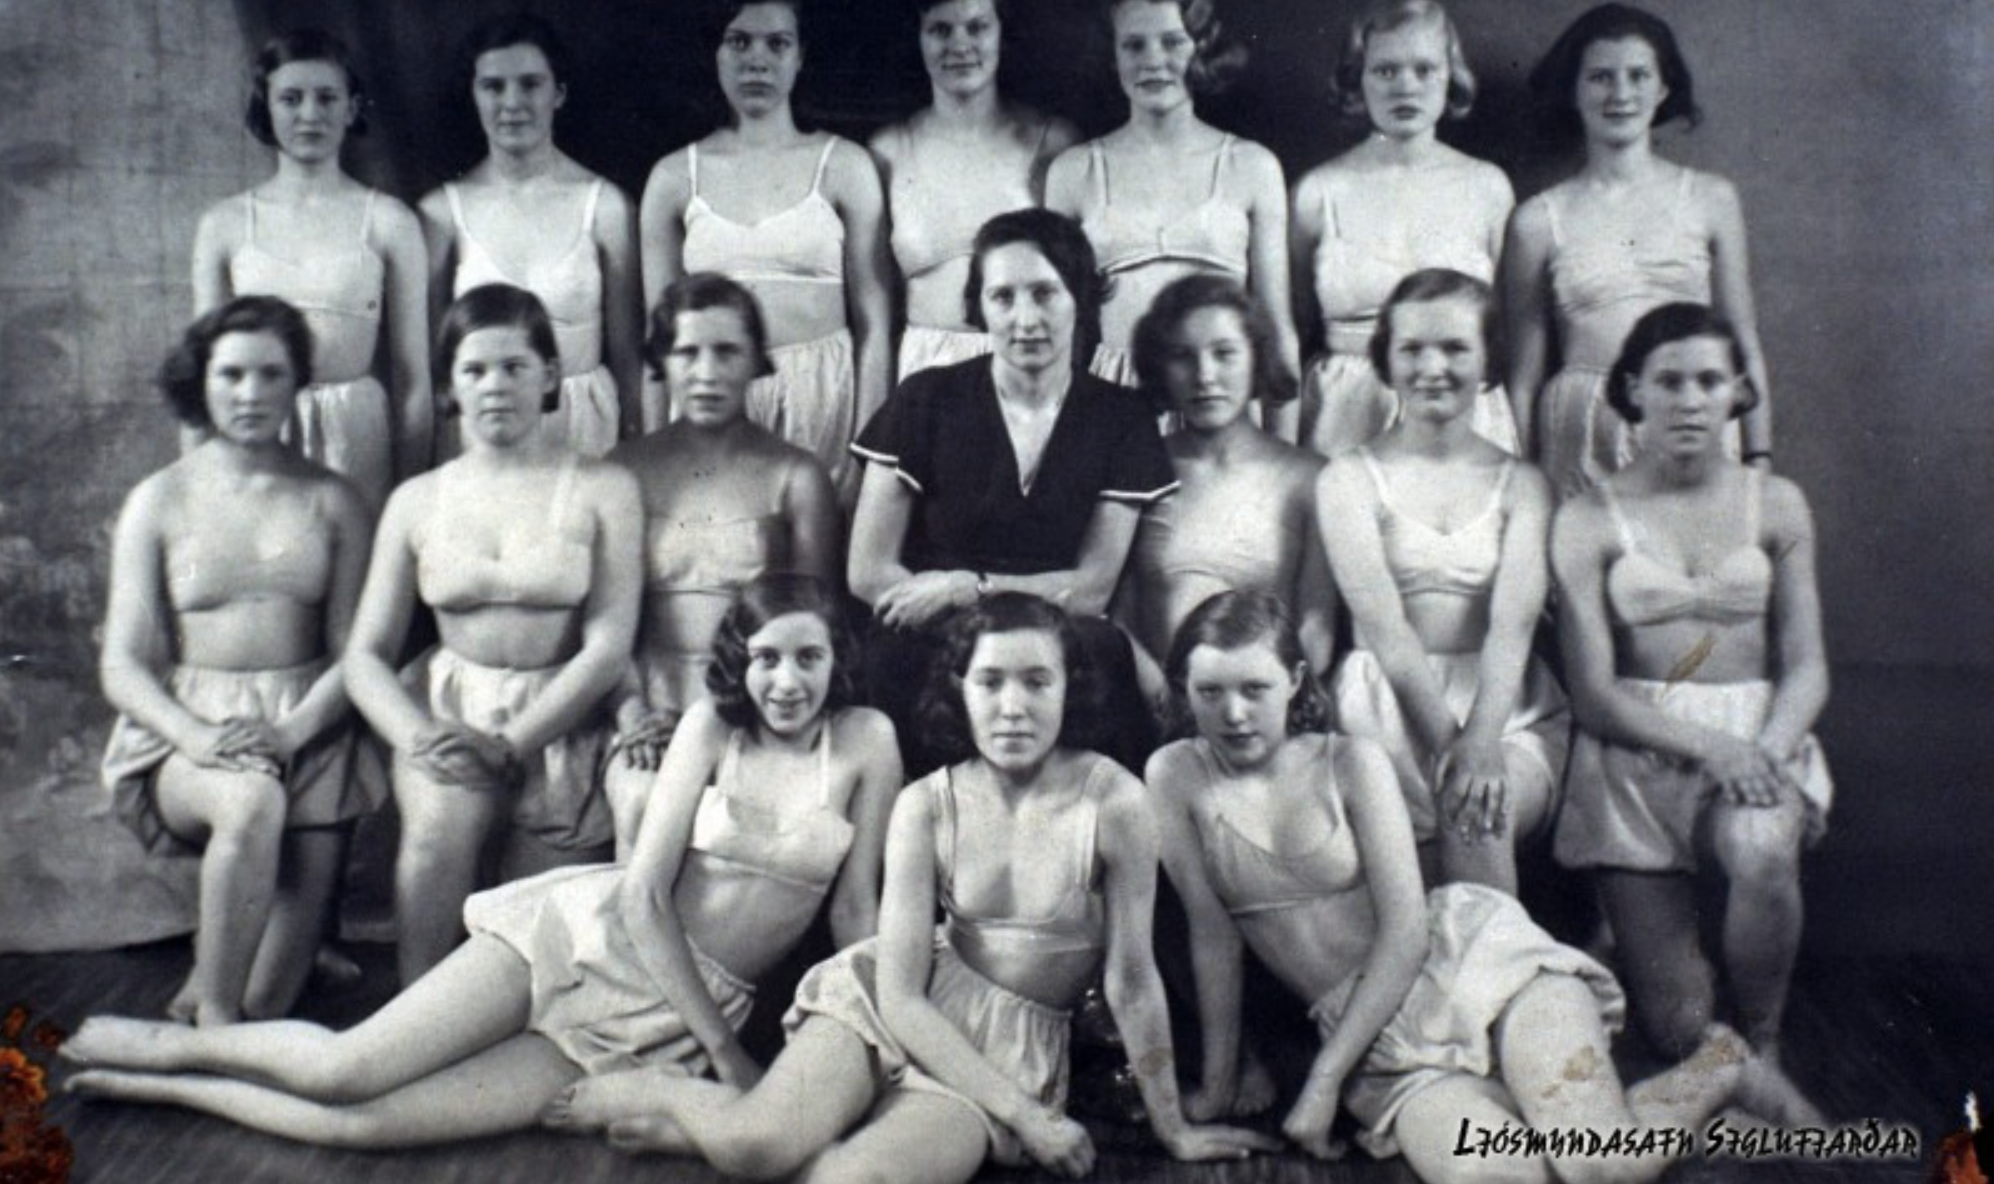 Hulda Karen, standing third from the right, with her gymnastics team